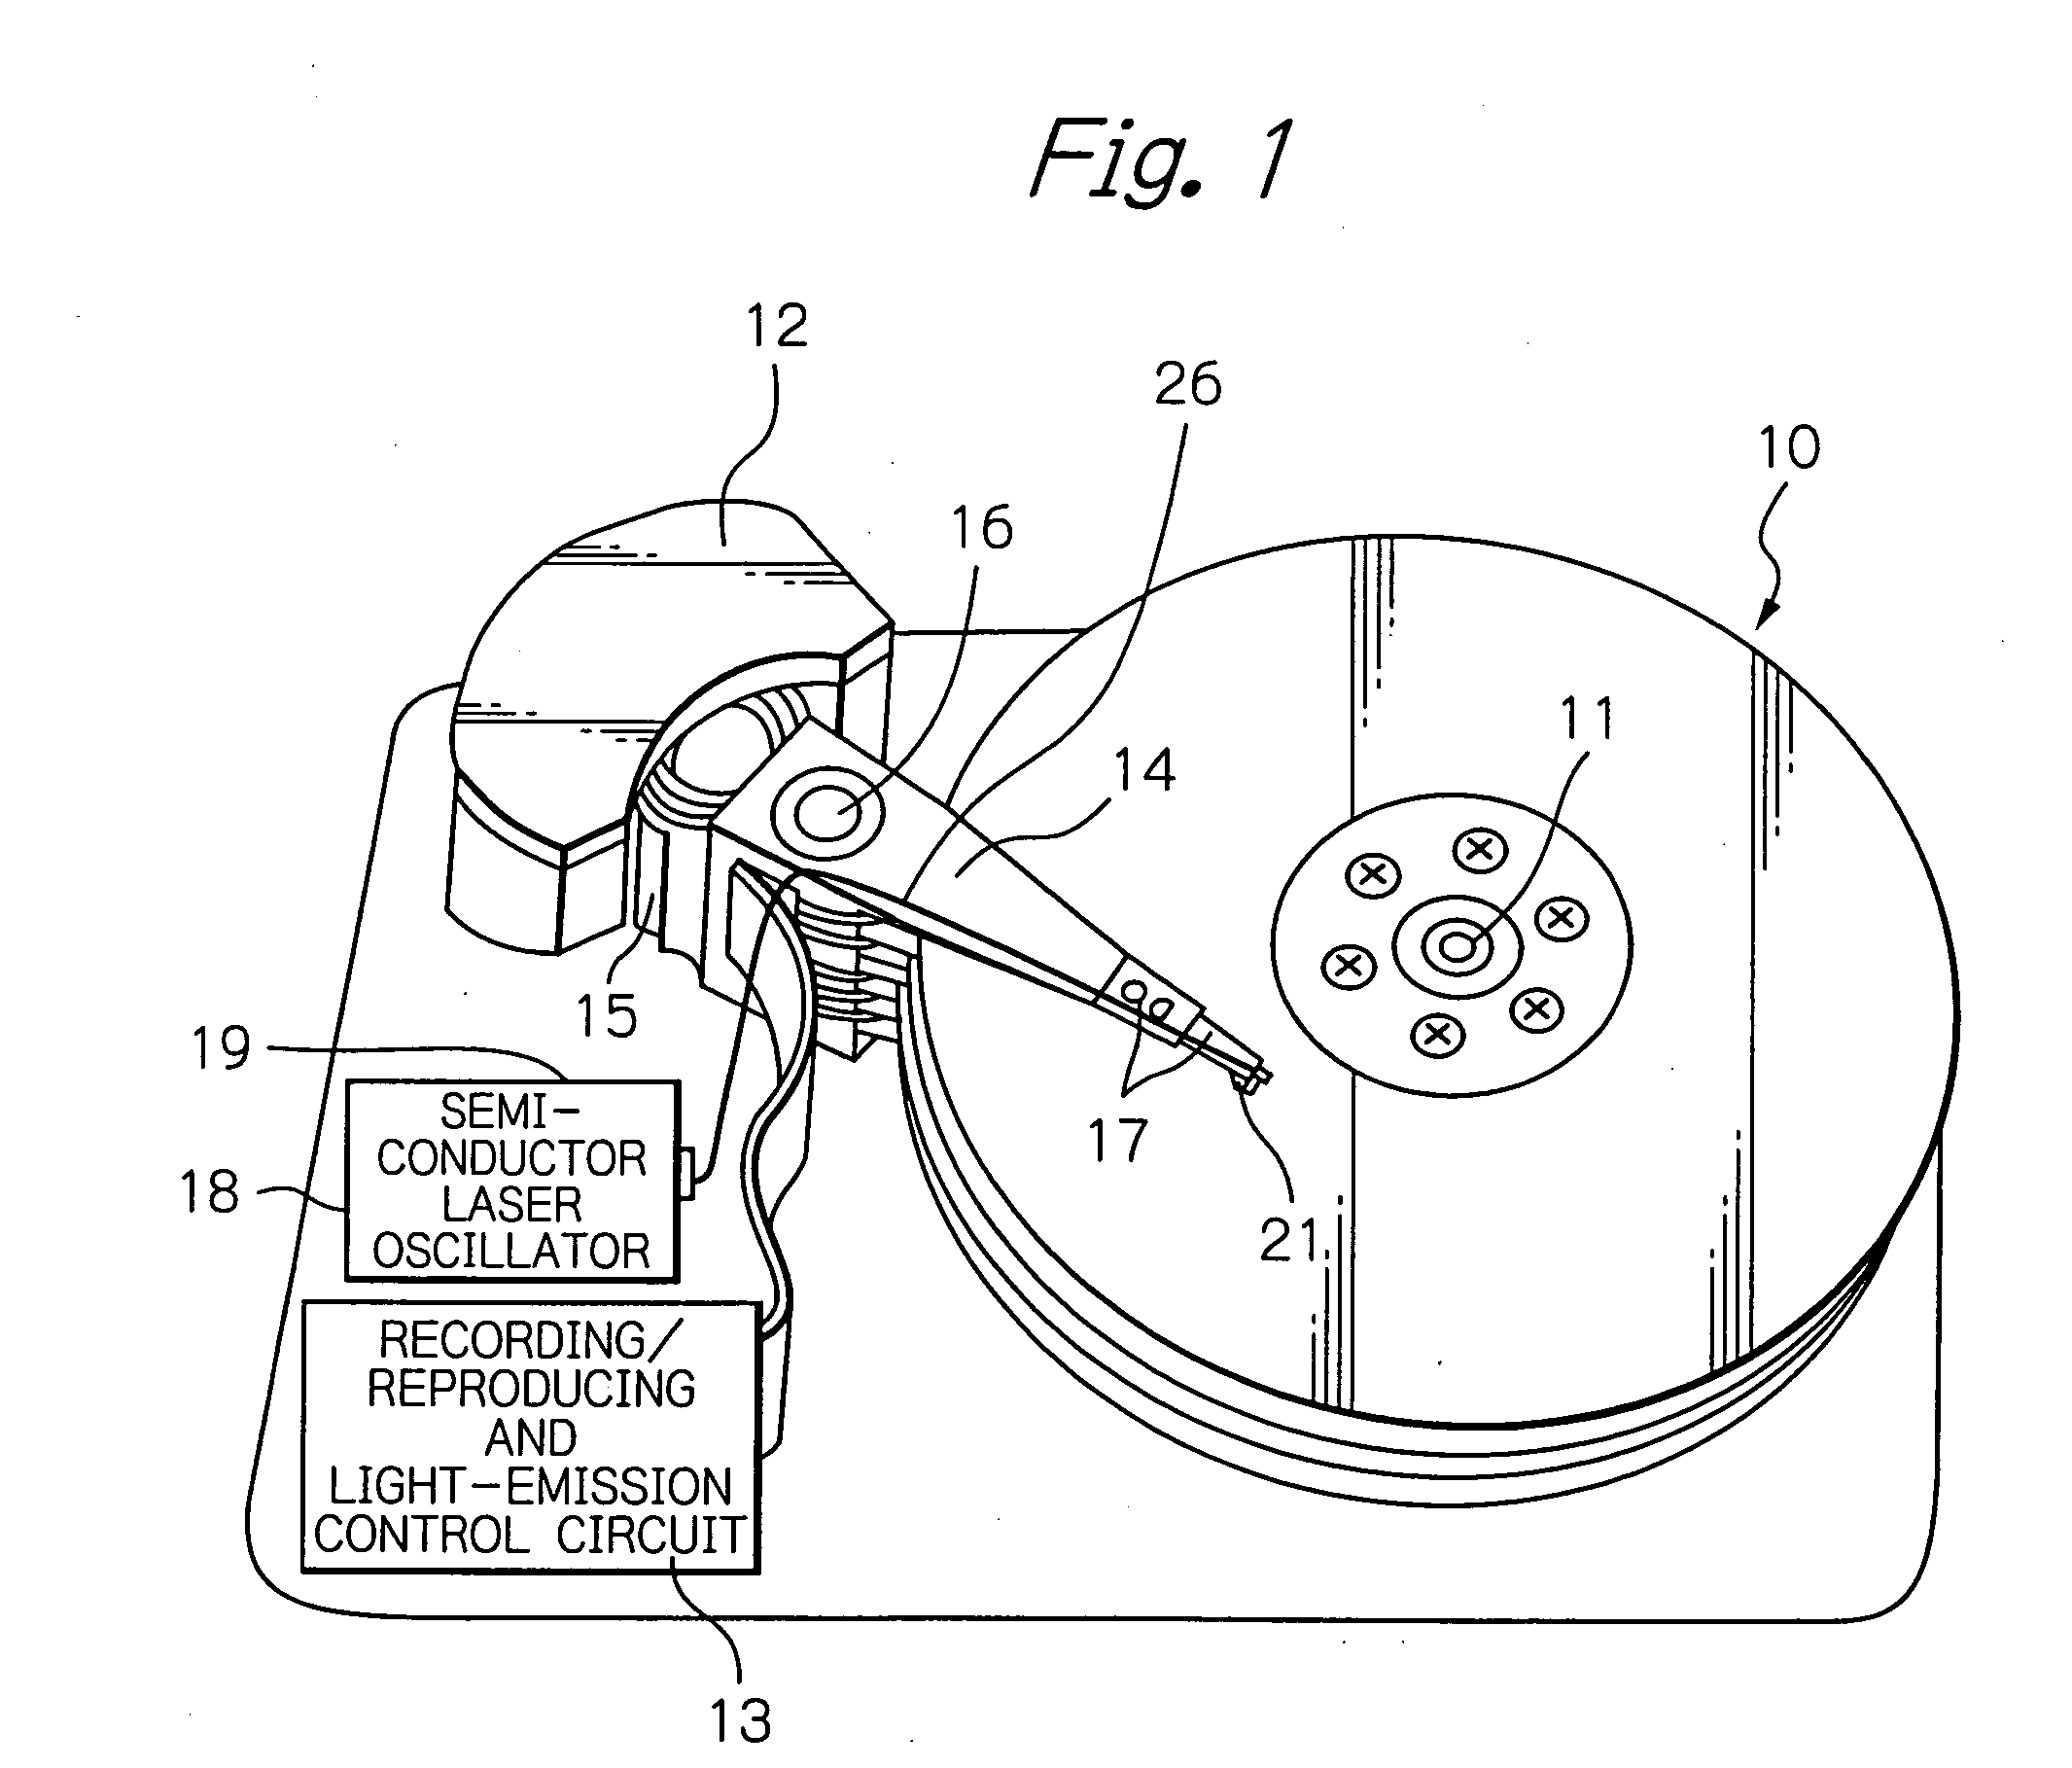 Thin-film magnetic head having near-field-light-generating portion with trapezoidal end